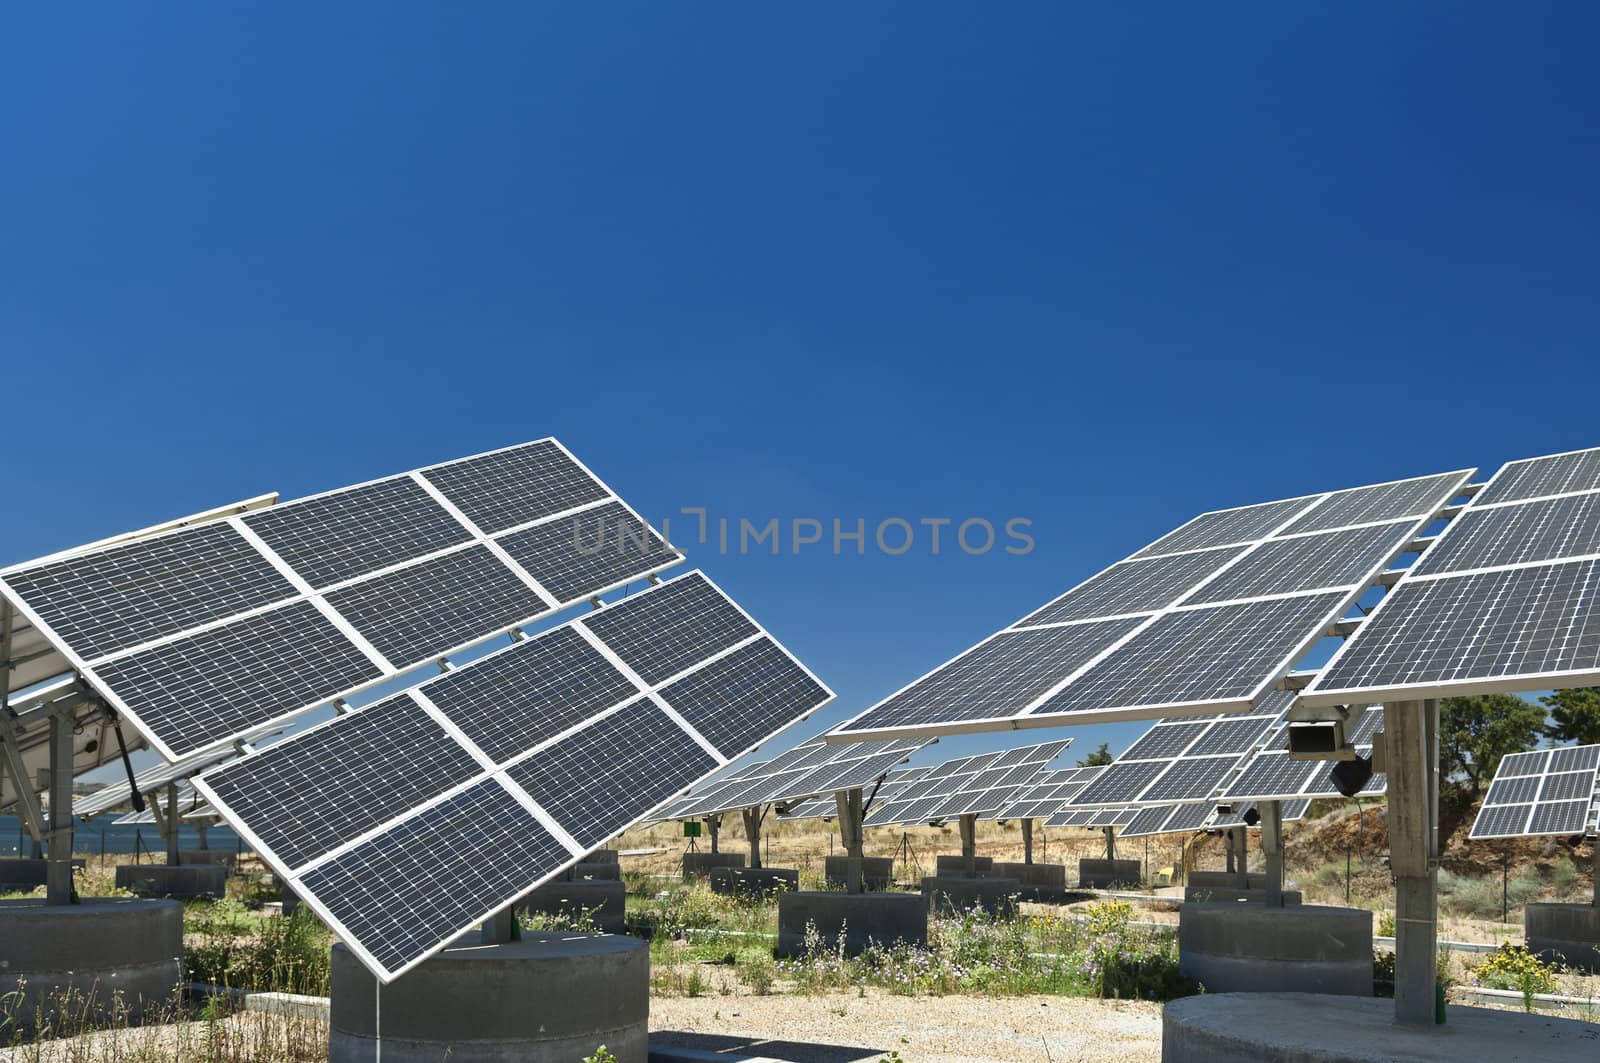 Photovoltaic silicon panels with tilted single axis track system in a small solar power plant, Portugal